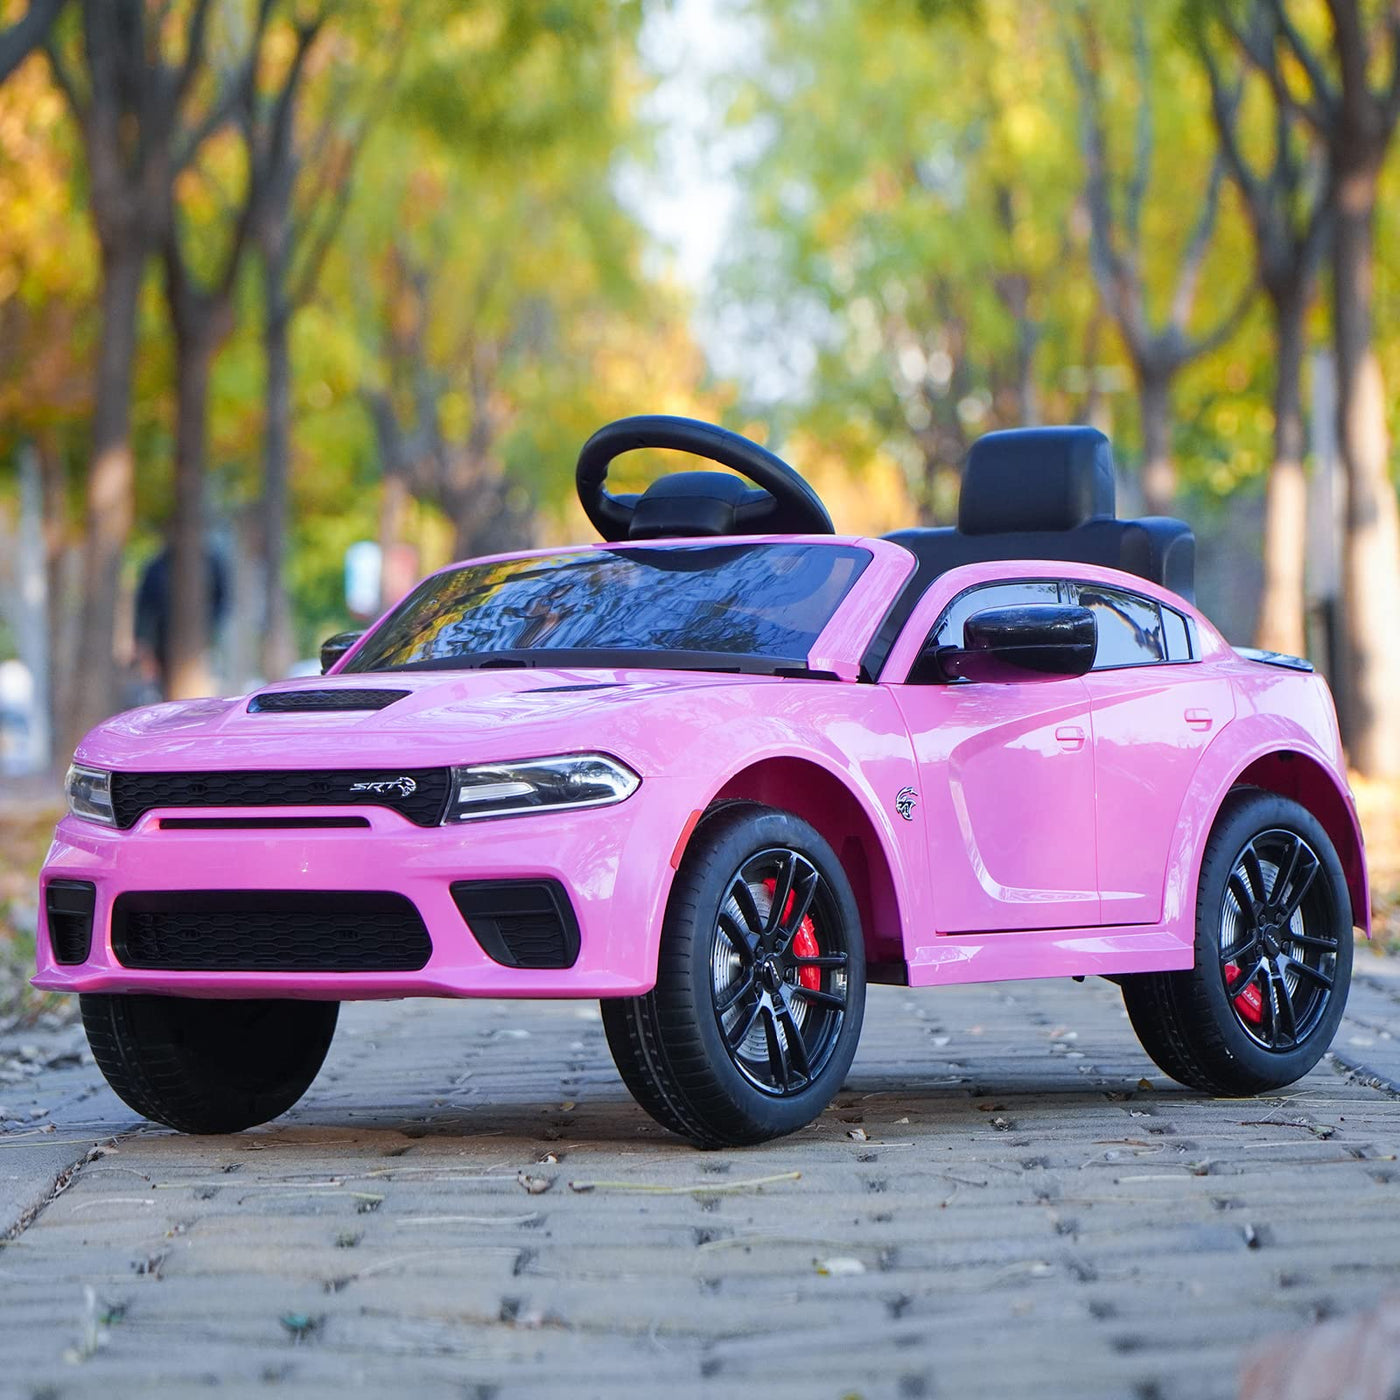 Blitzshark 12V Kids Ride on Police Car Licensed Dodge Charger Battery Powered Electric Vehicle, with 7AH Big Battery, 2.4G Remote Control, Suspension, Real Megaphone, Siren, Flashing Light, Music